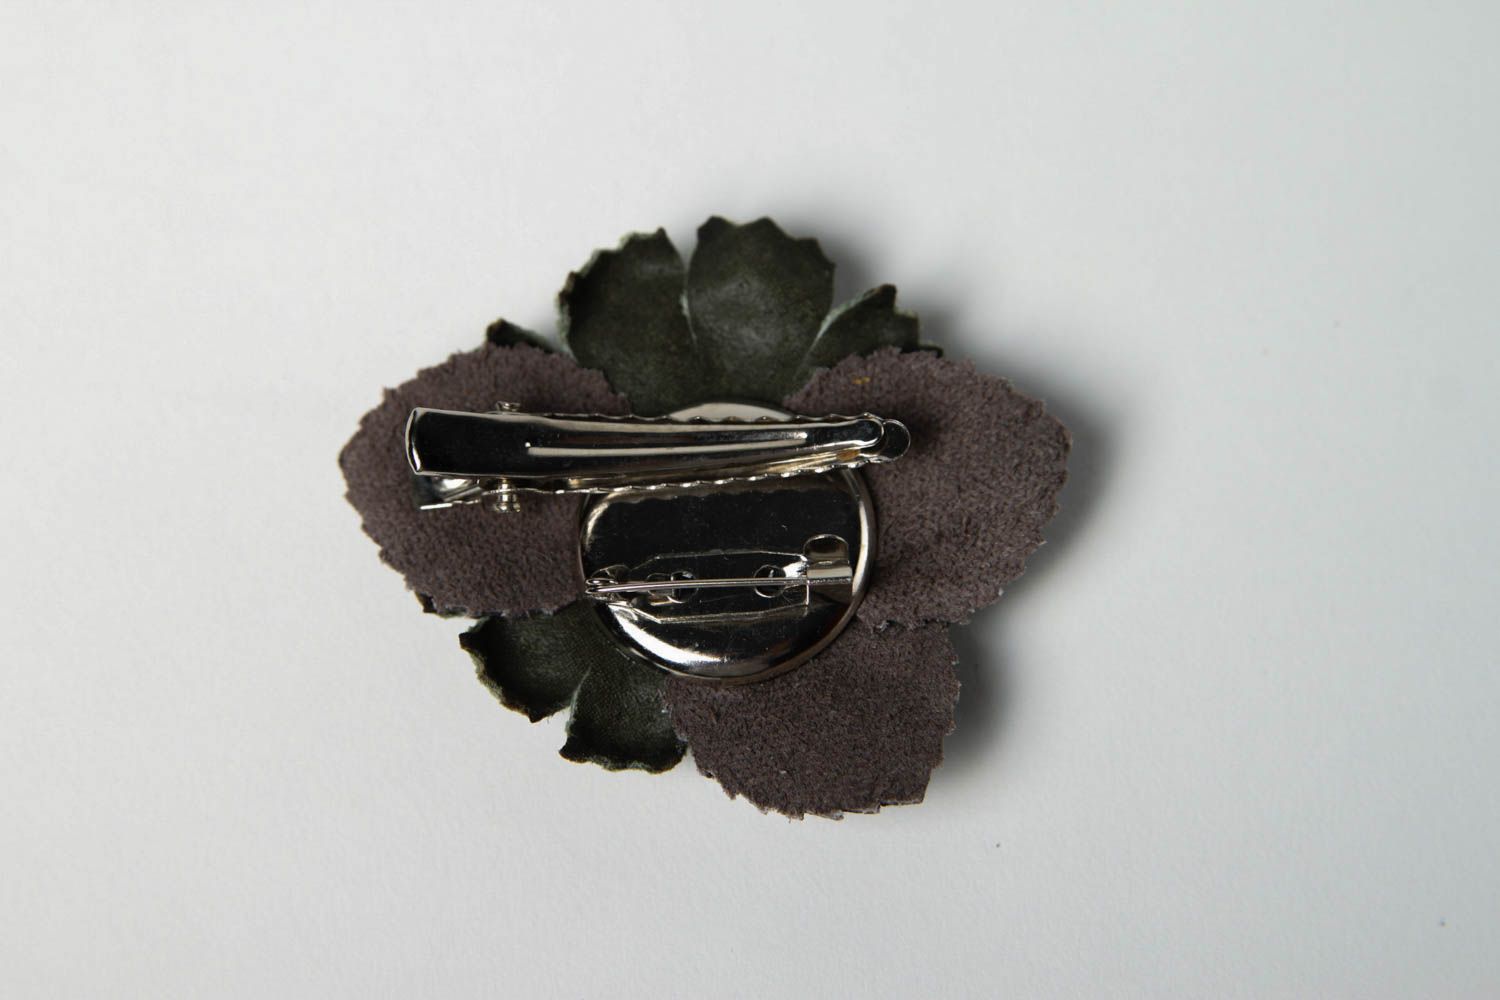 Flower jewelry leather brooch handmade jewelry leather accessories gifts for her photo 5